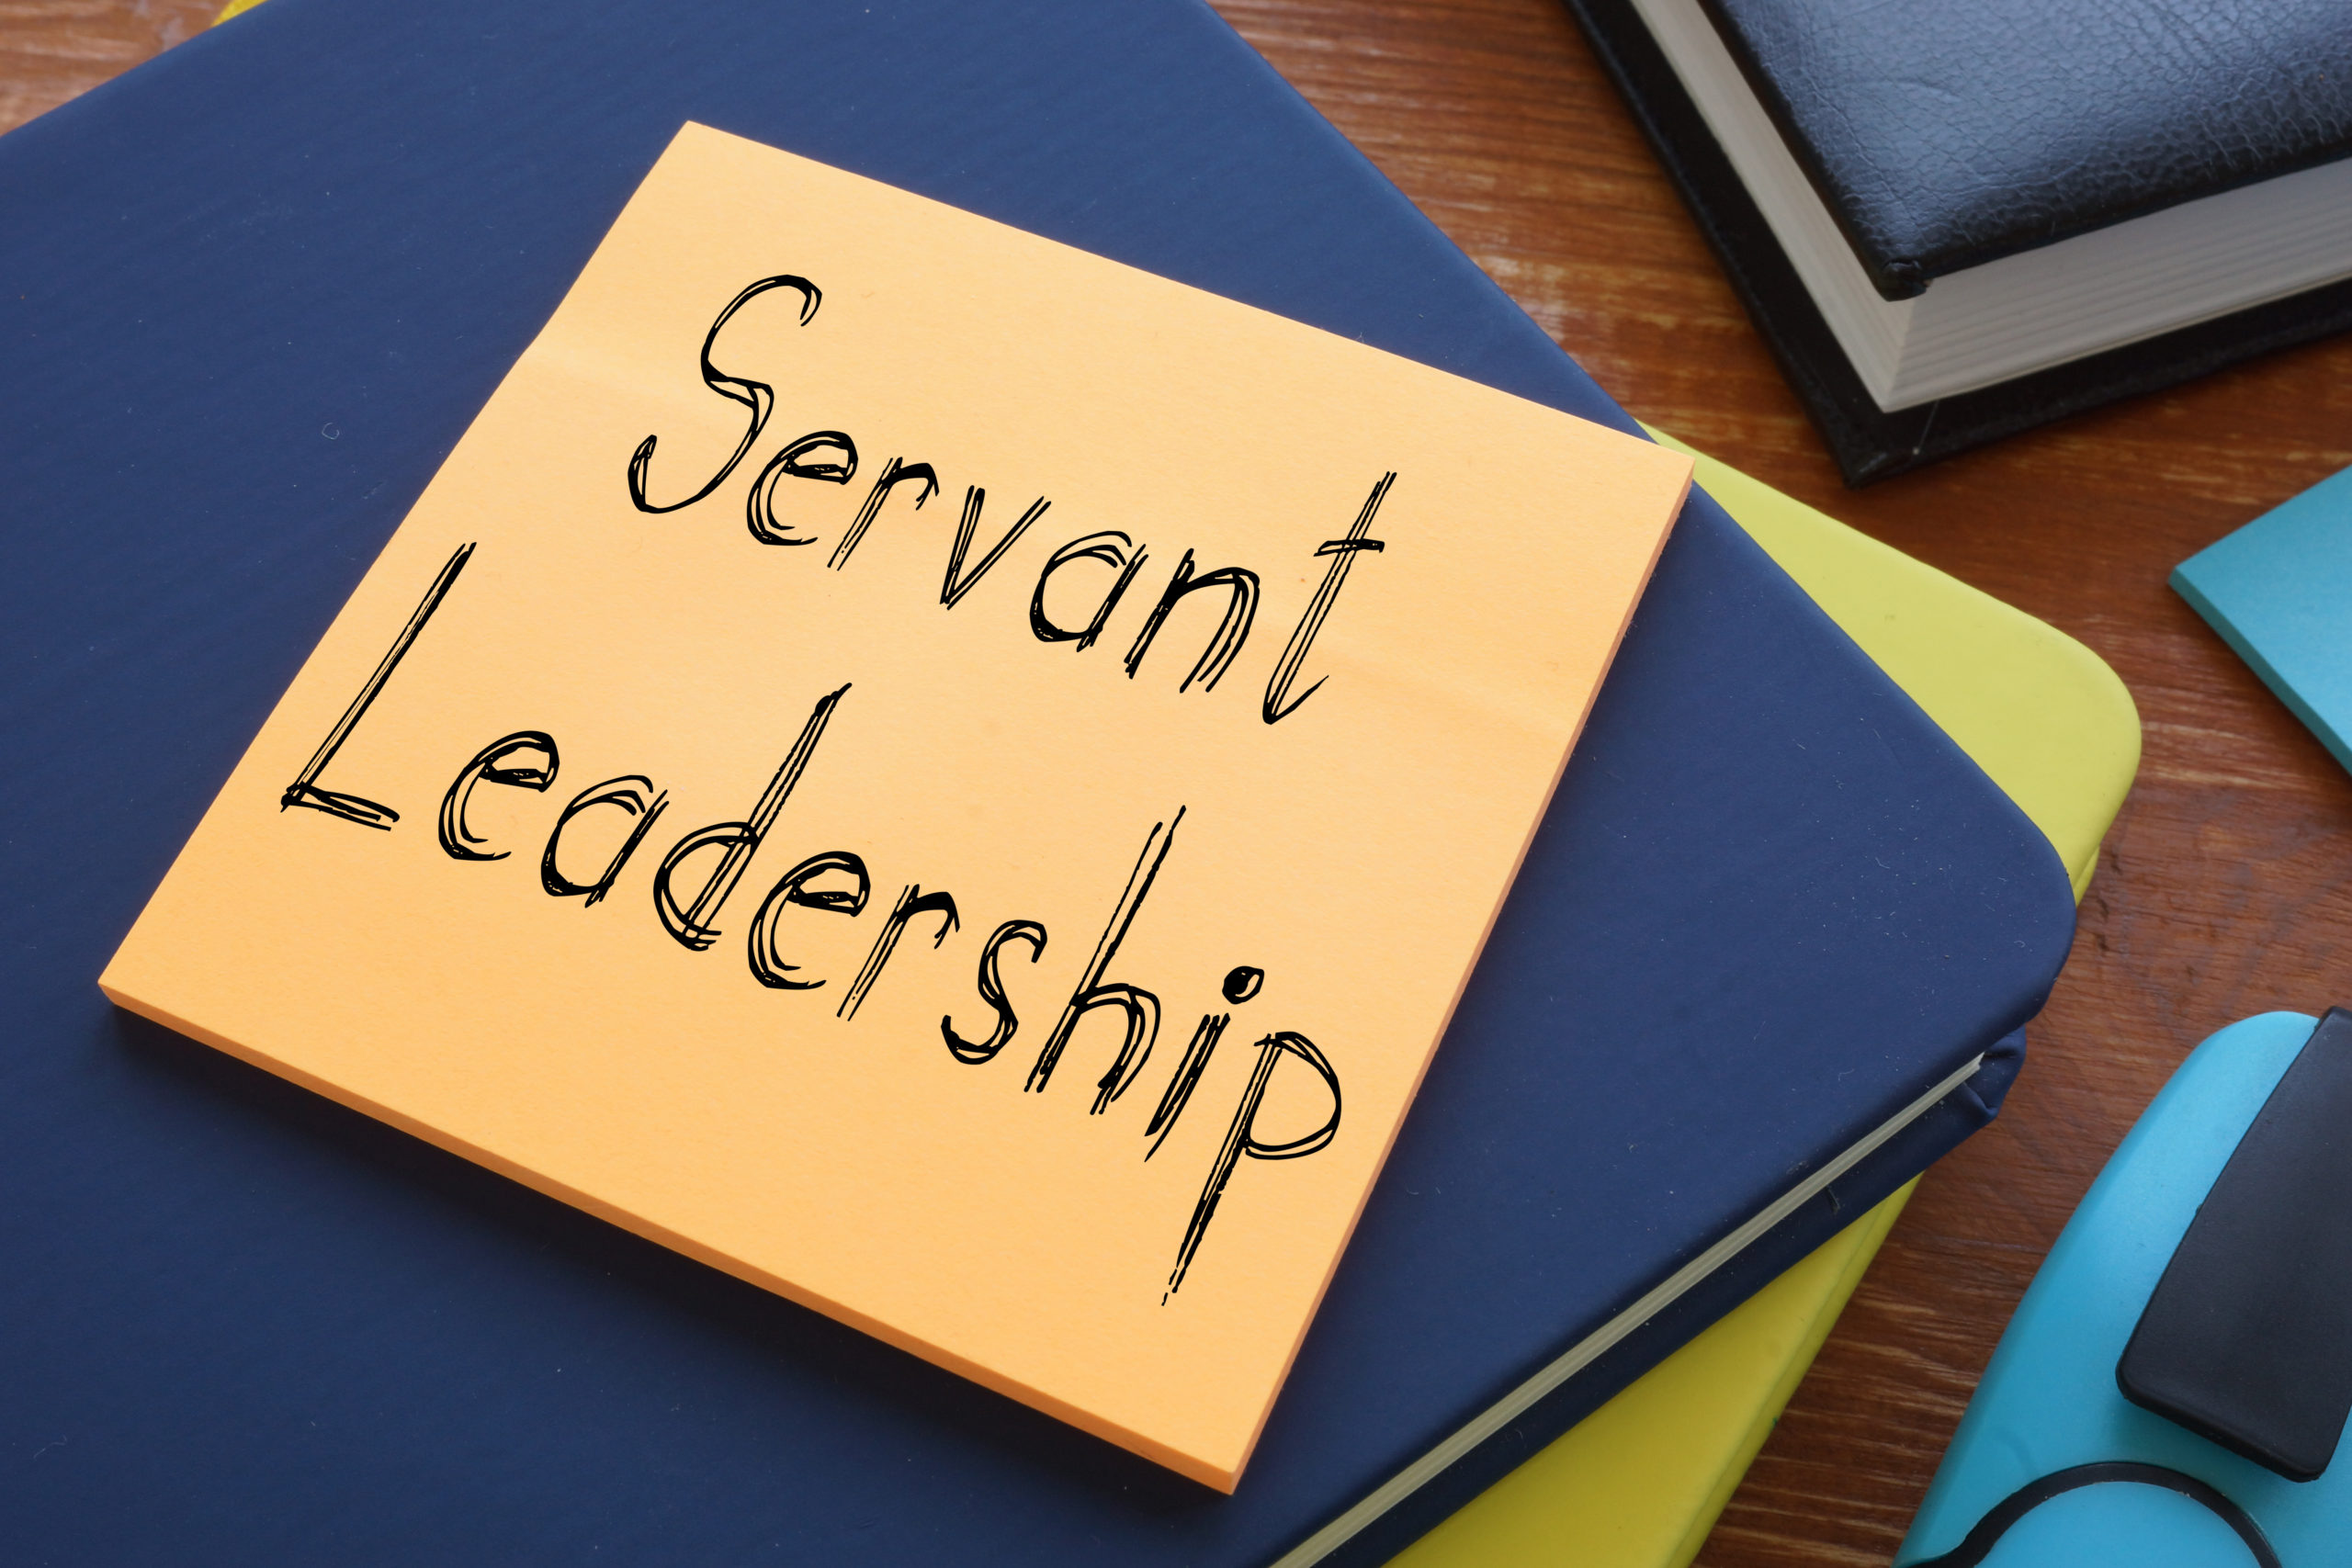 Retaining Talent Through Servant Leadership - A Guide For Leaders